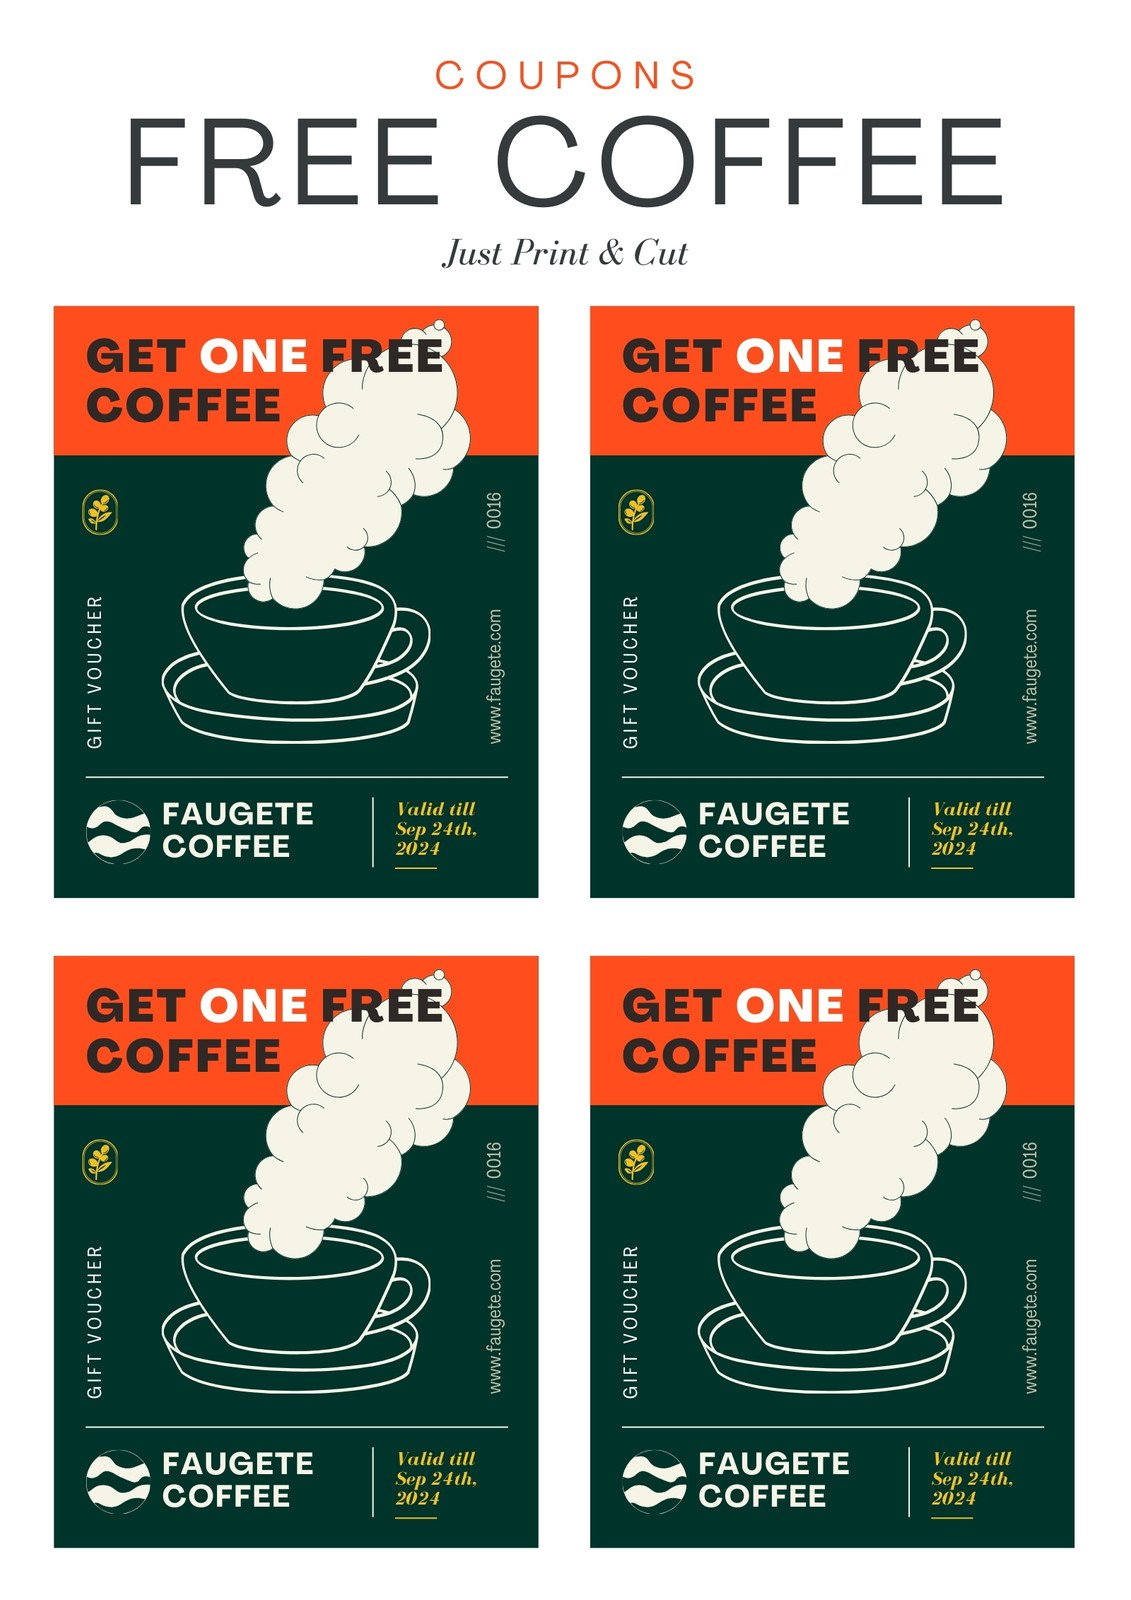 Customize 40+ Coffee Coupon Templates Online - Canva inside Free Coffee Coupons Printable